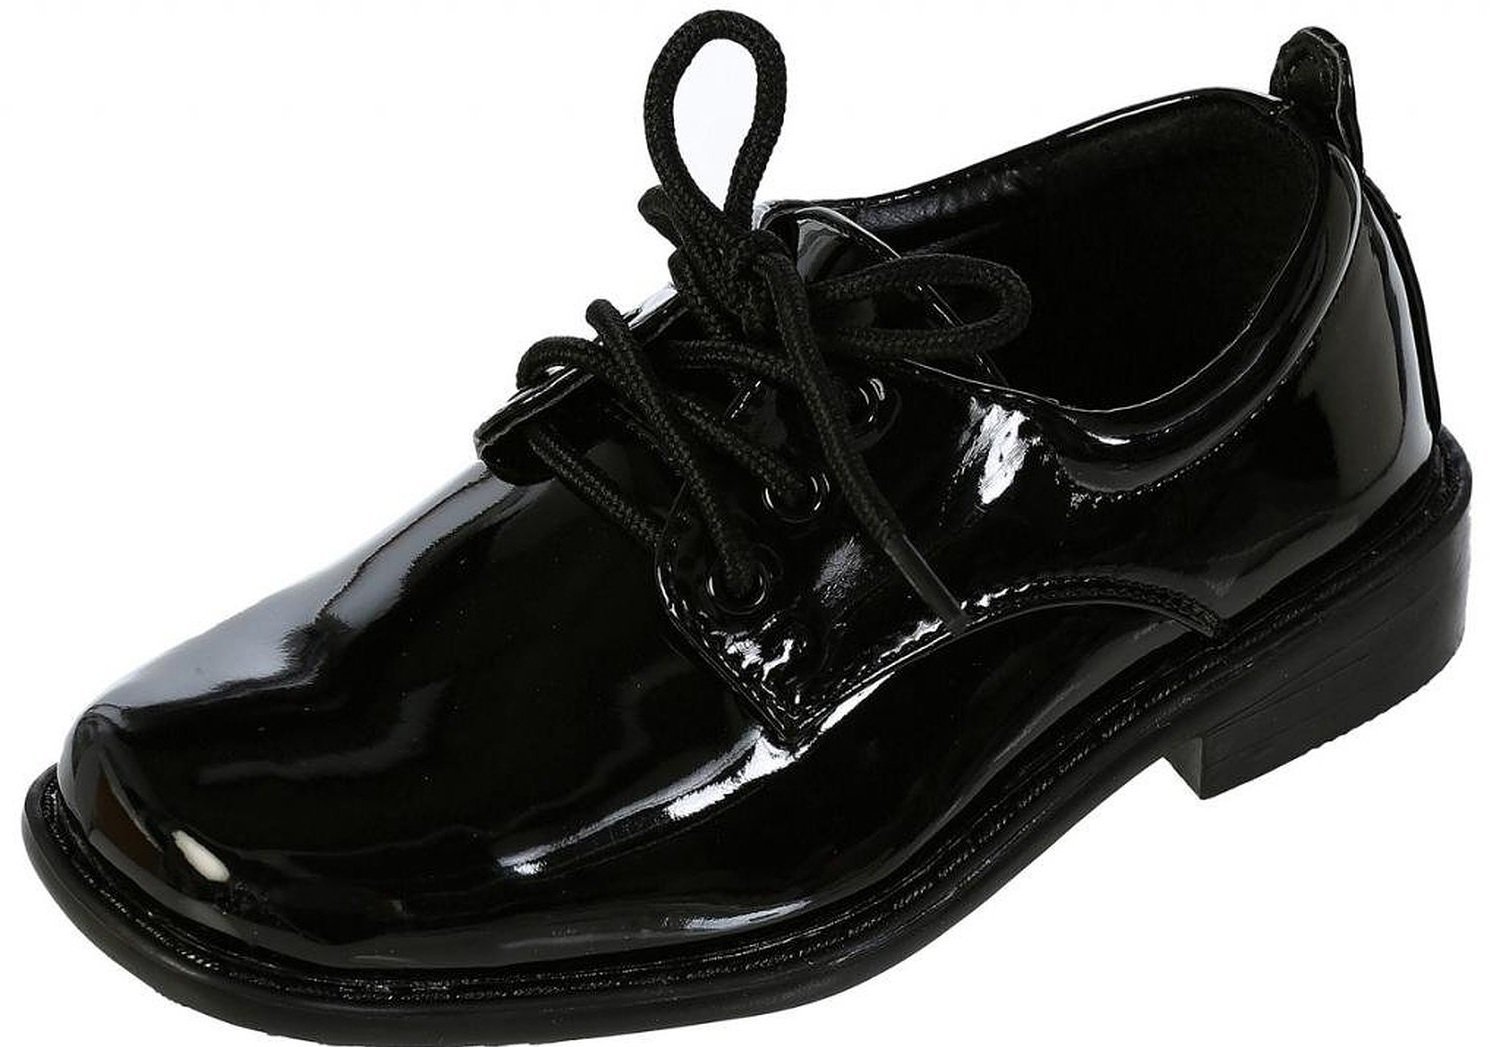 Boys Square Toe Lace Up Oxford Patent Dress Shoes - Available in Black 5 Toddler